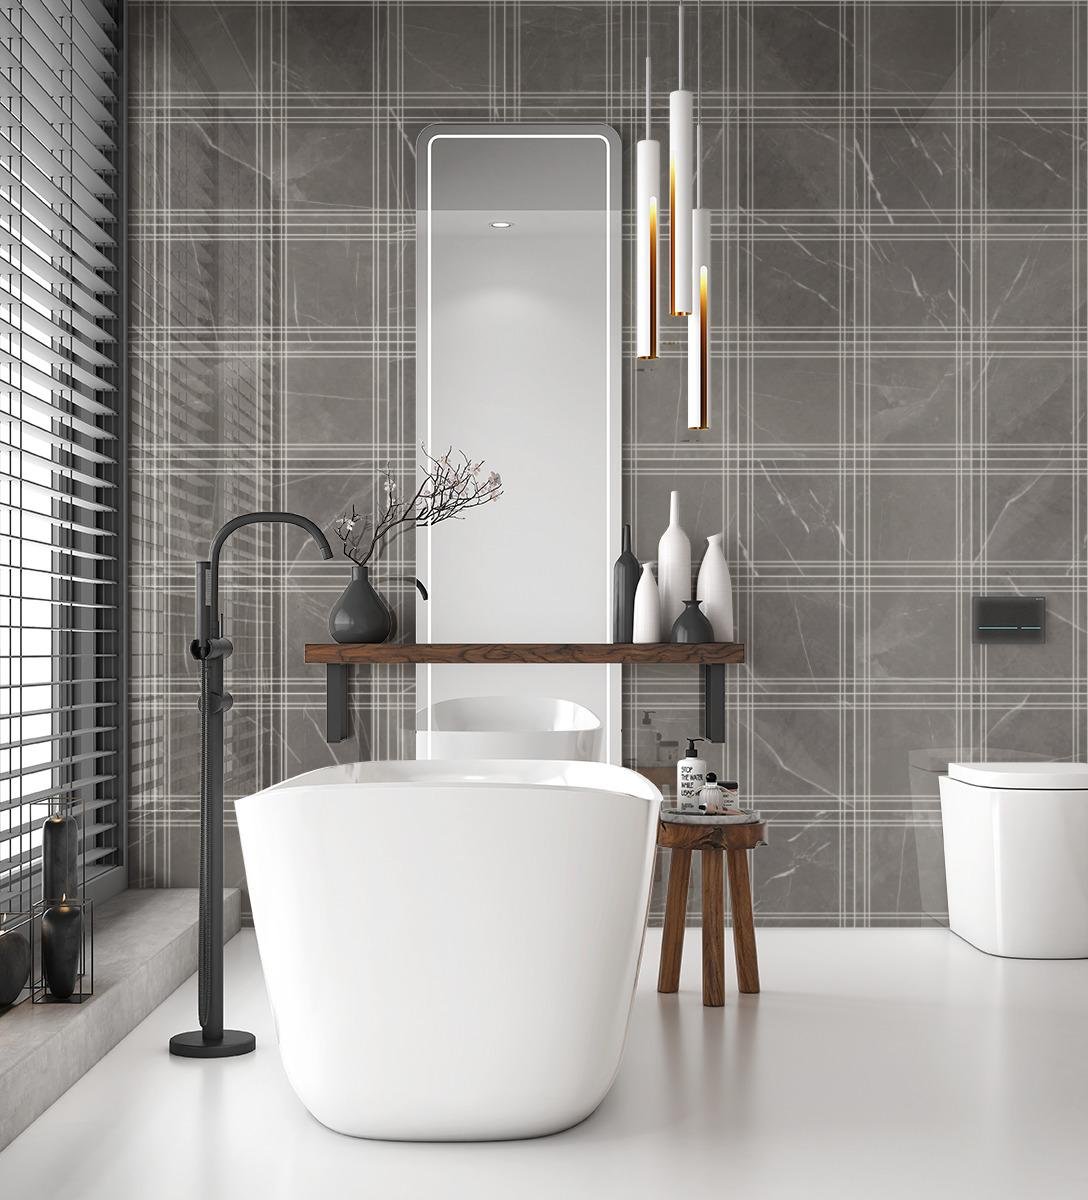 Hollis Plaid, Pattern A, Petite Scale, Impero Polished, White Grout